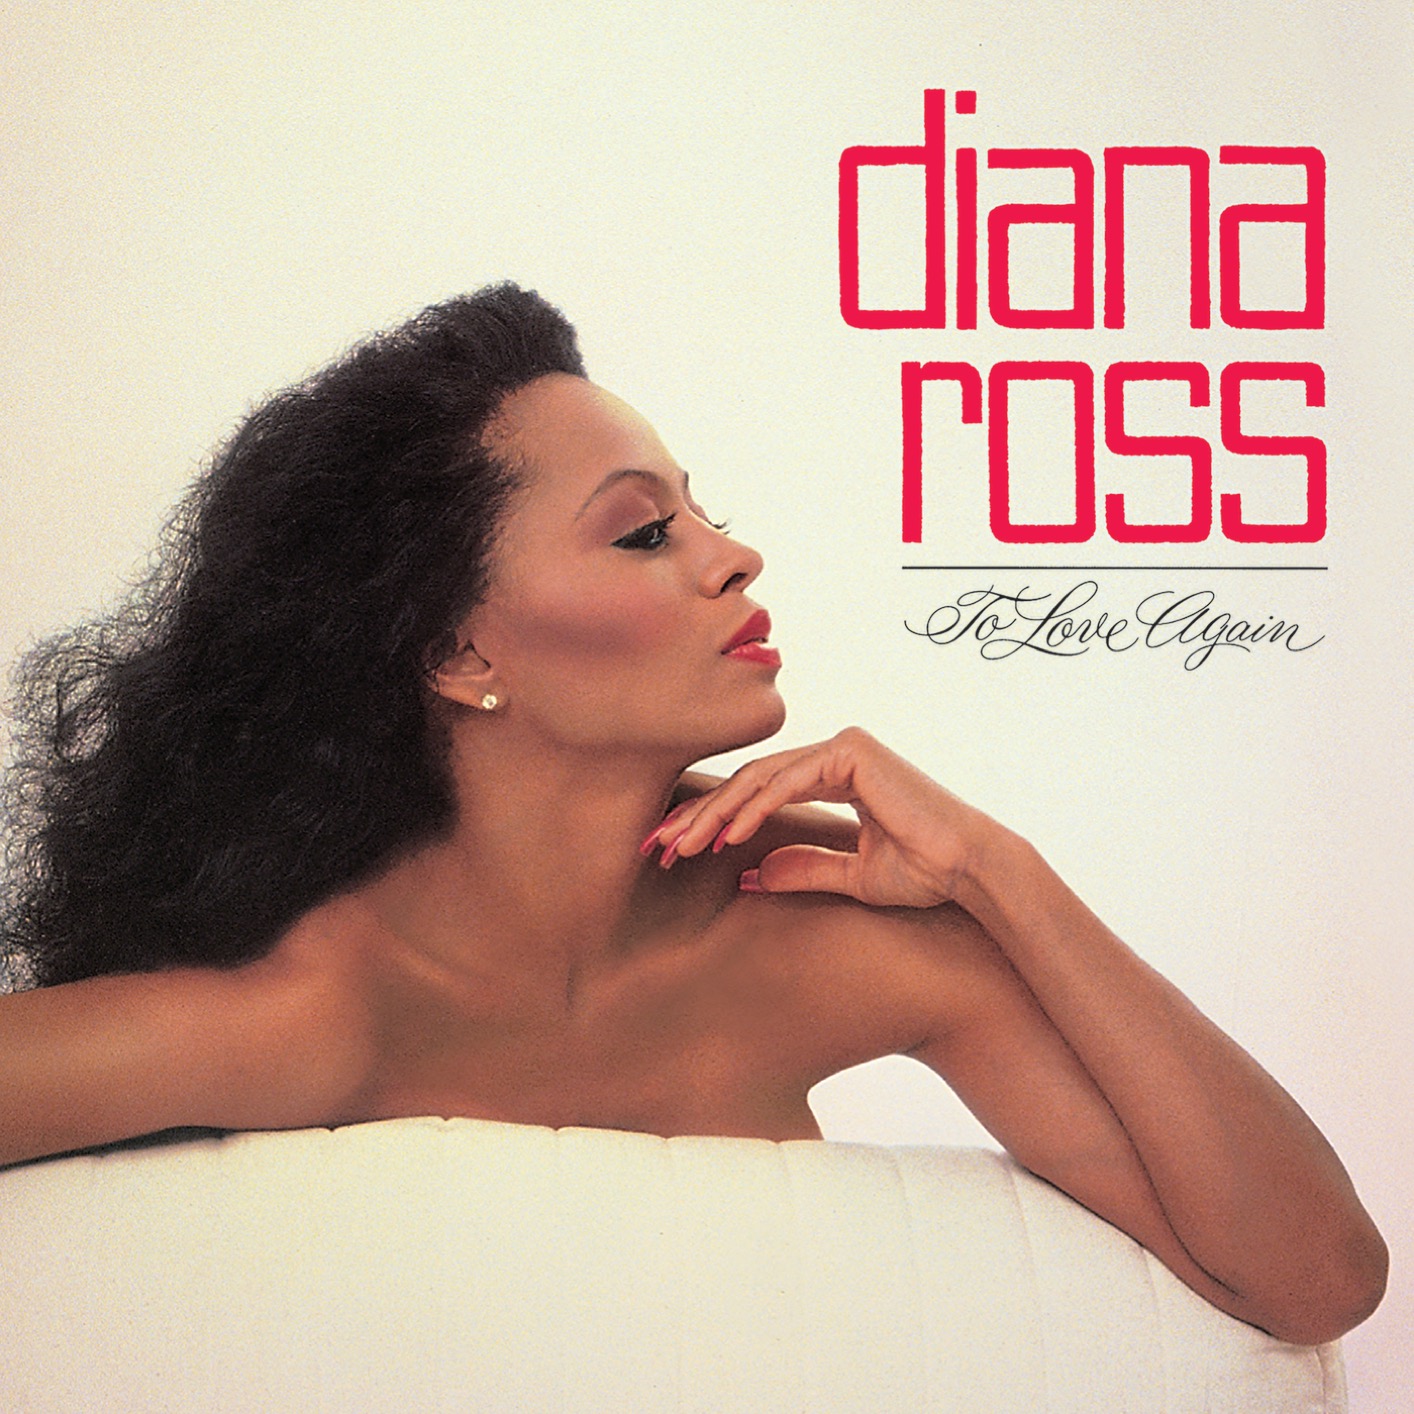 Diana Ross - 1981 - To Love Again [2021 Motown Records] 24-192